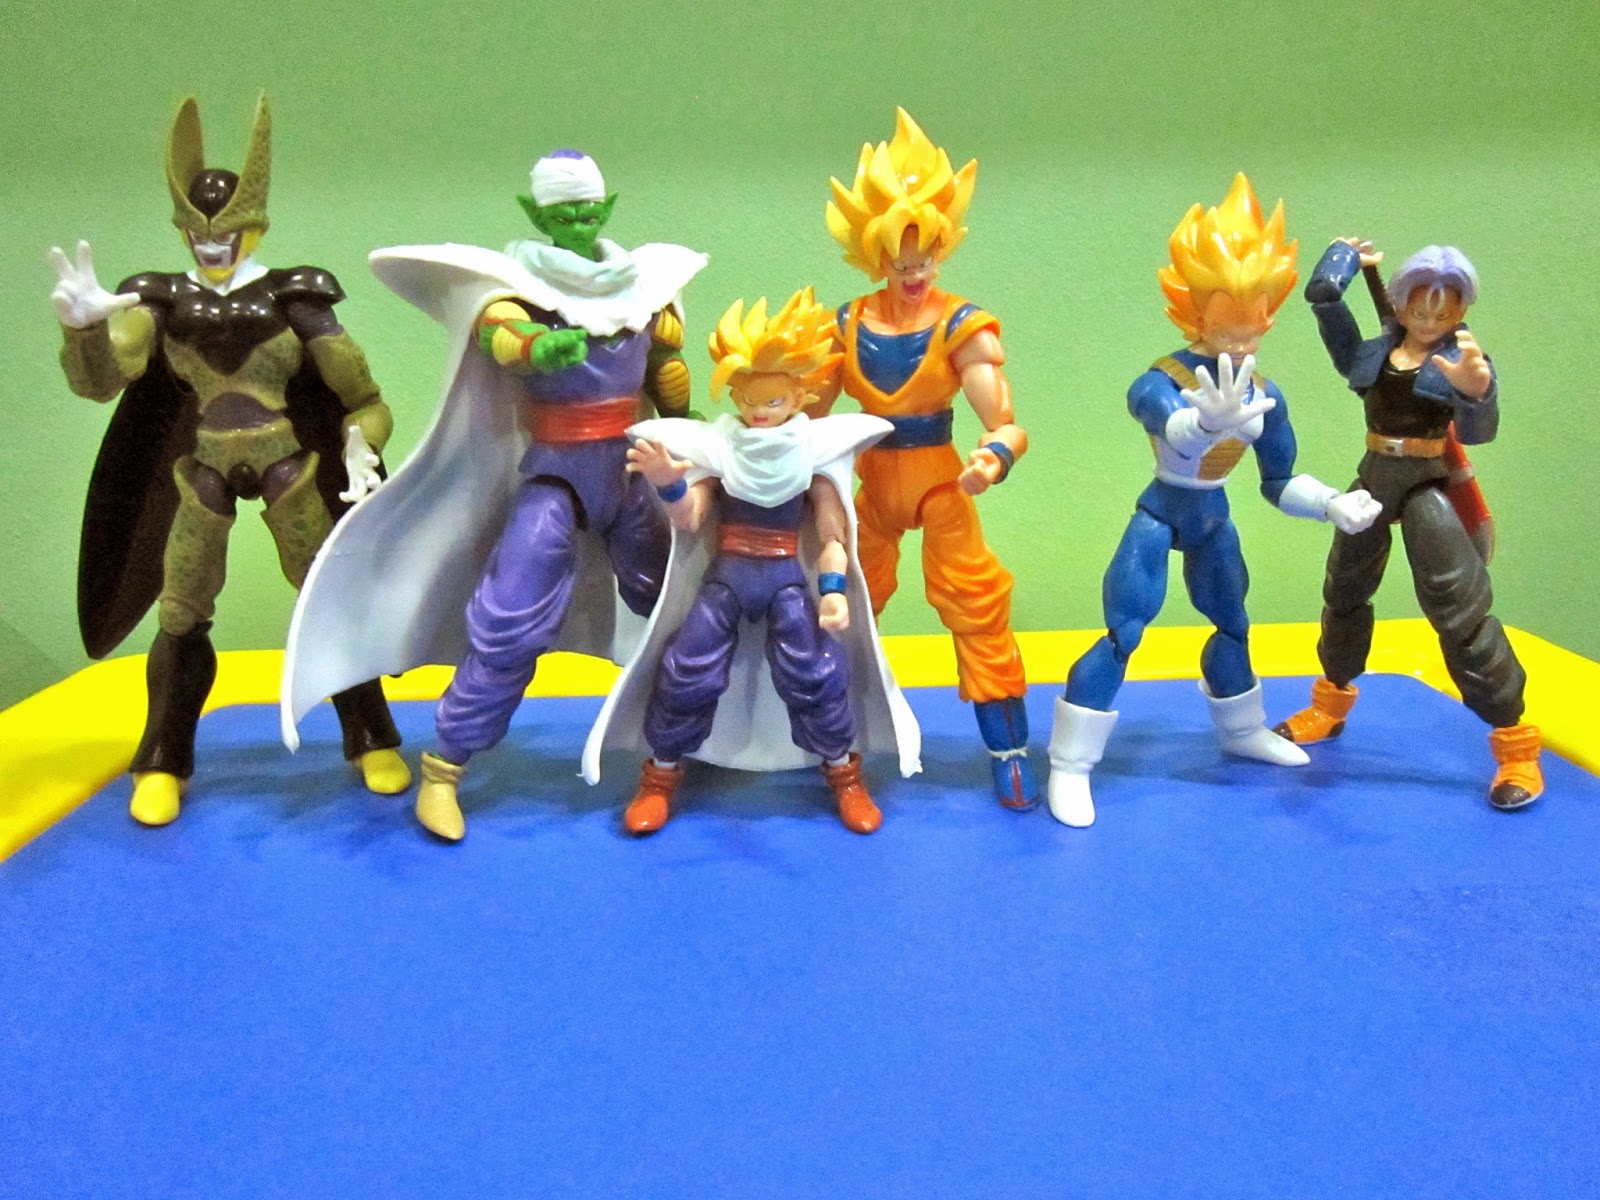 Dragon Ball Af Bootleg Figures Review - Images for Dragon Ball Af Bootleg Figures Review